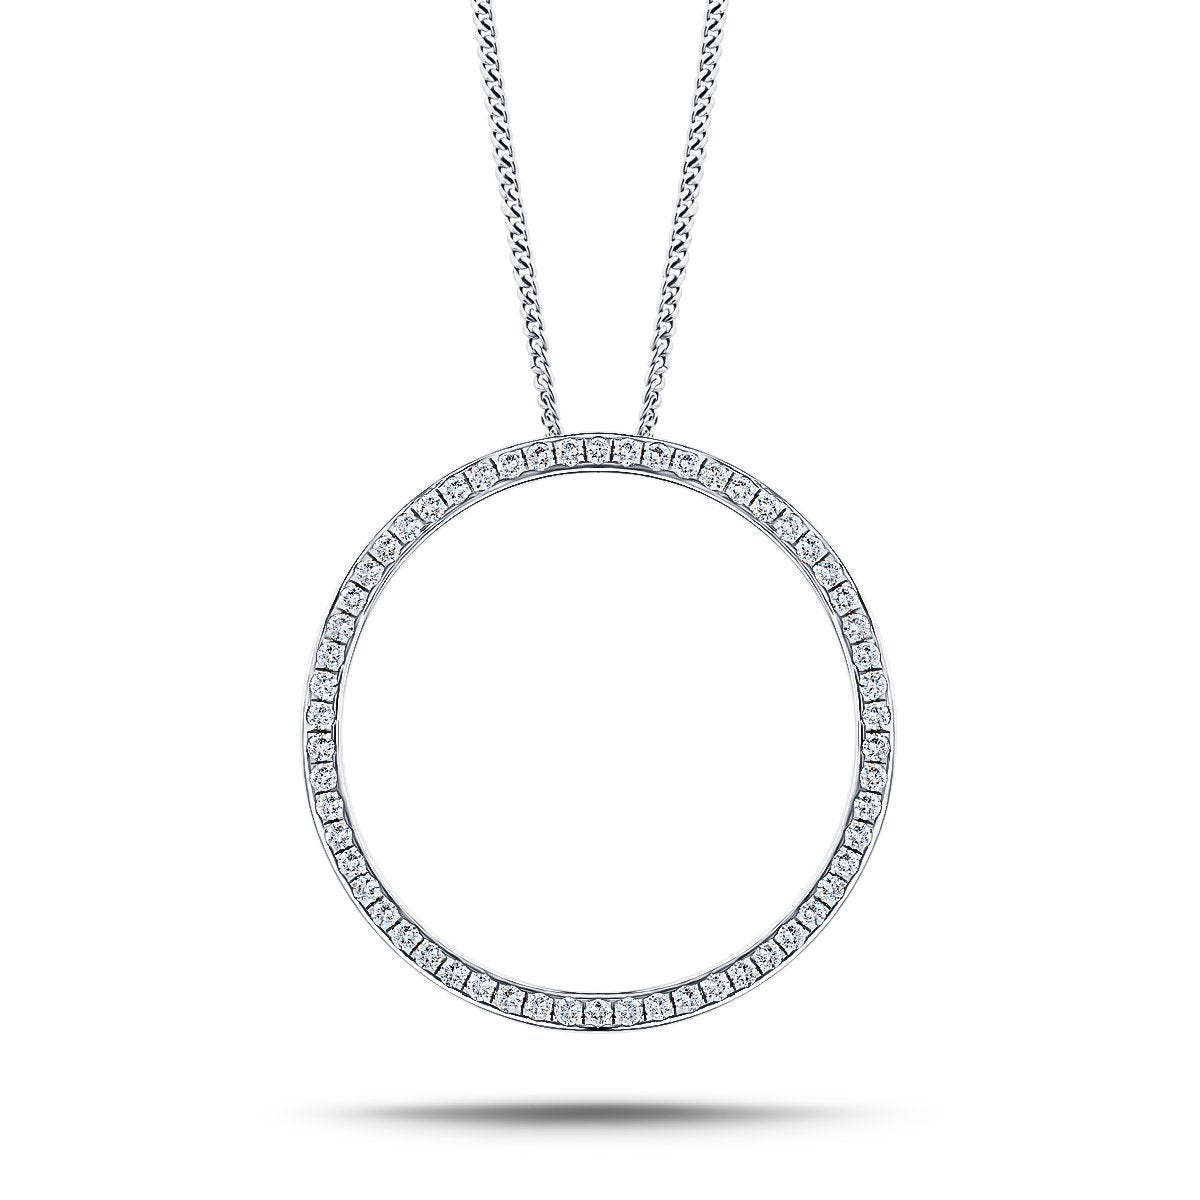 Diamond Circle of Life Necklace 1.00ct G/SI Quality in 18k White Gold - All Diamond